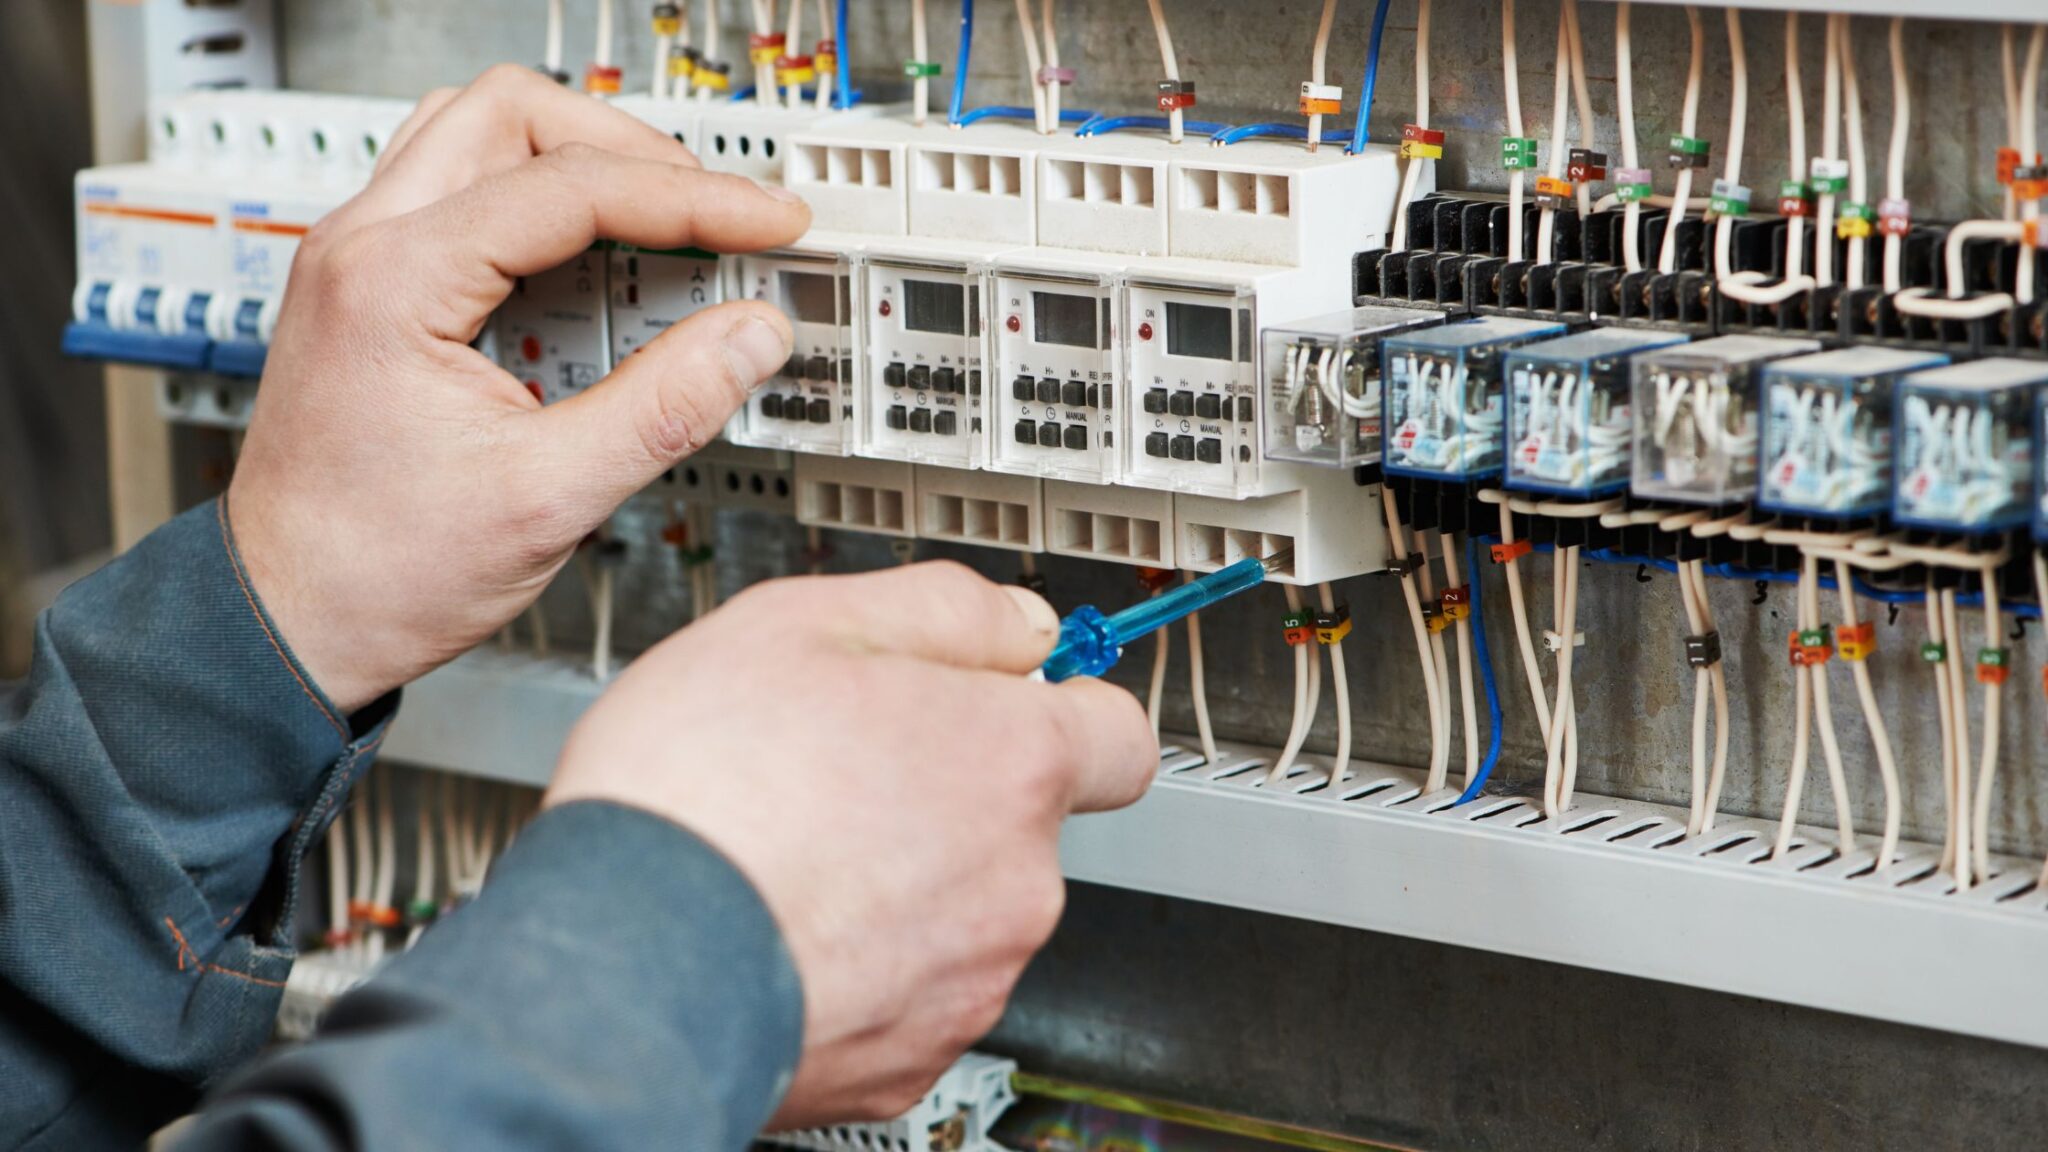 Licensed Electricians Financing